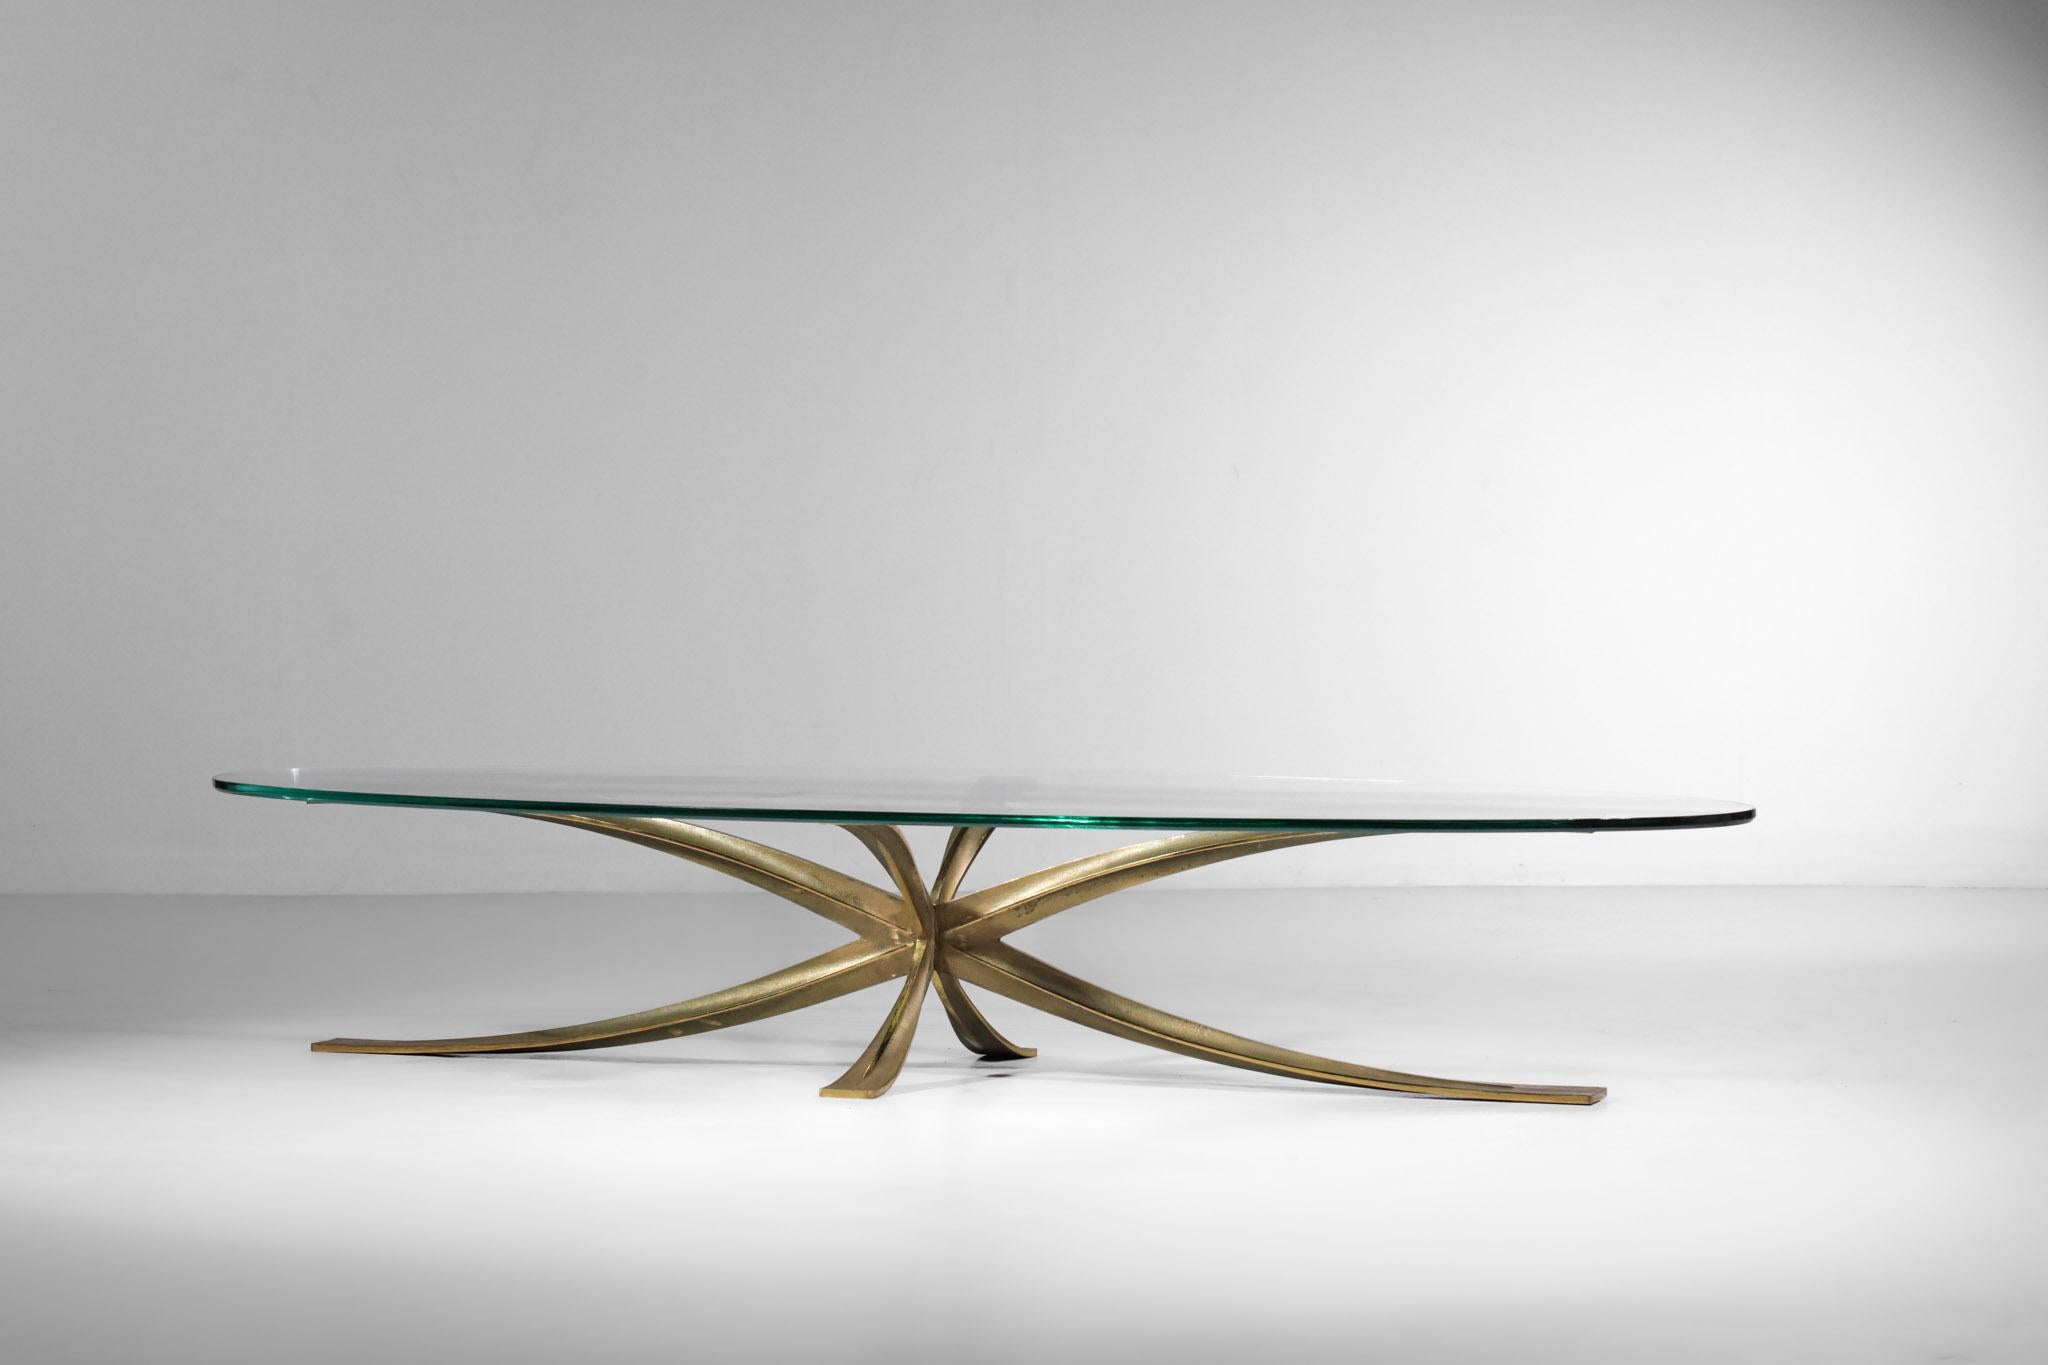 Large Michel Mangematin Coffee Table in Gilt Bronze and Oval Glass 1960's Design For Sale 4